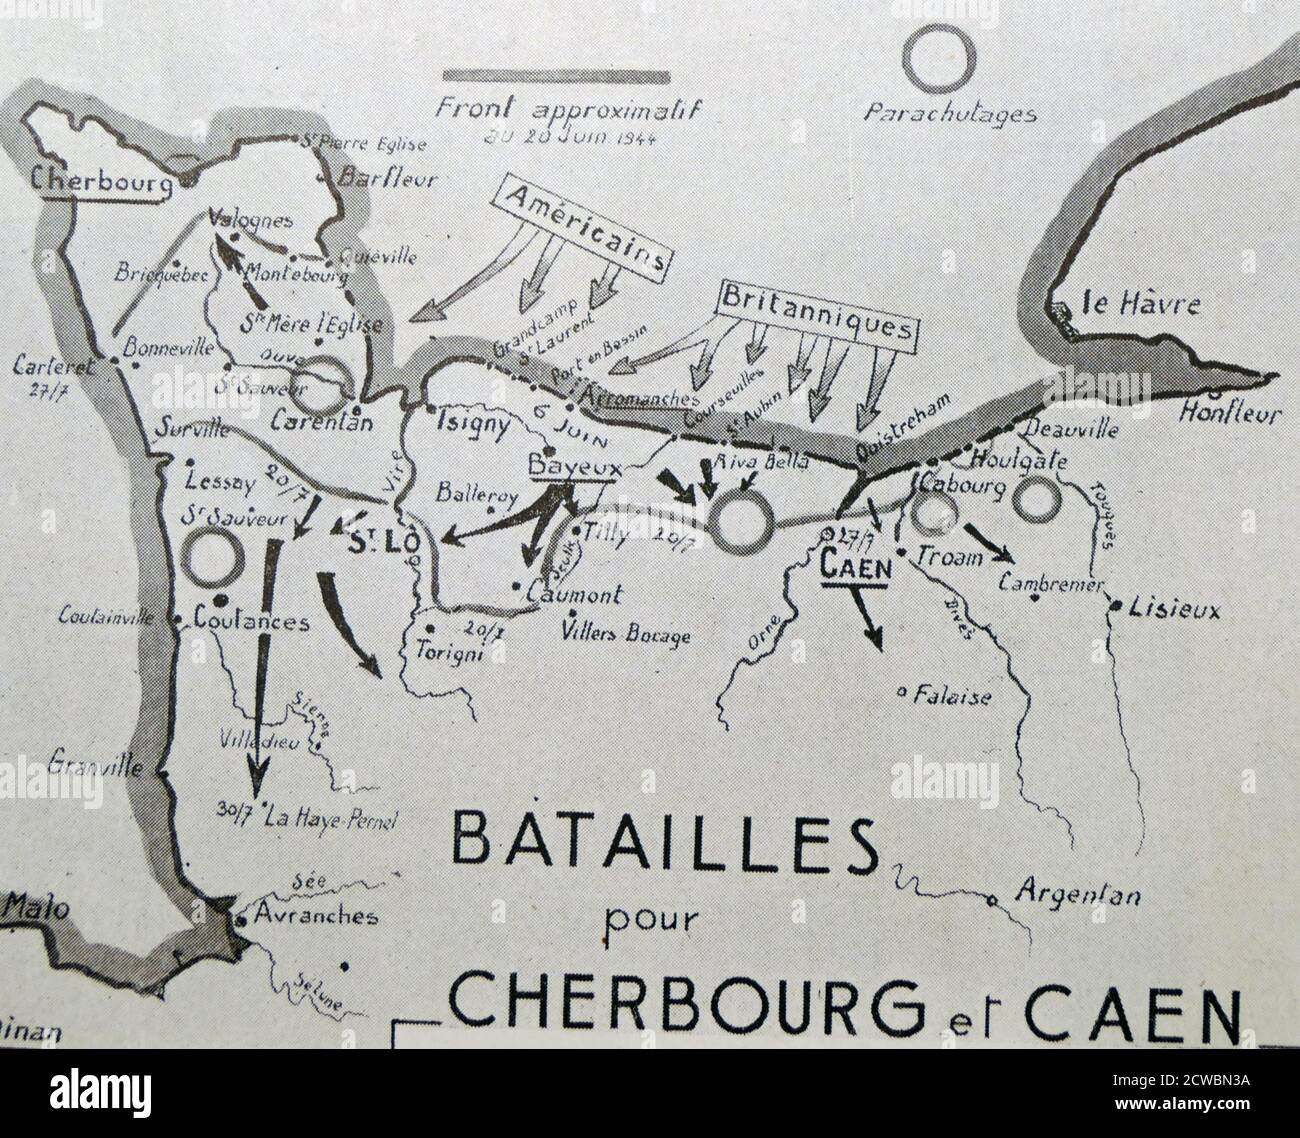 Black and white photograph of World War II (1939-1945) showing a map of battlefields in Cherbourg and Caen between 27 June and 9 July 1944. Stock Photo